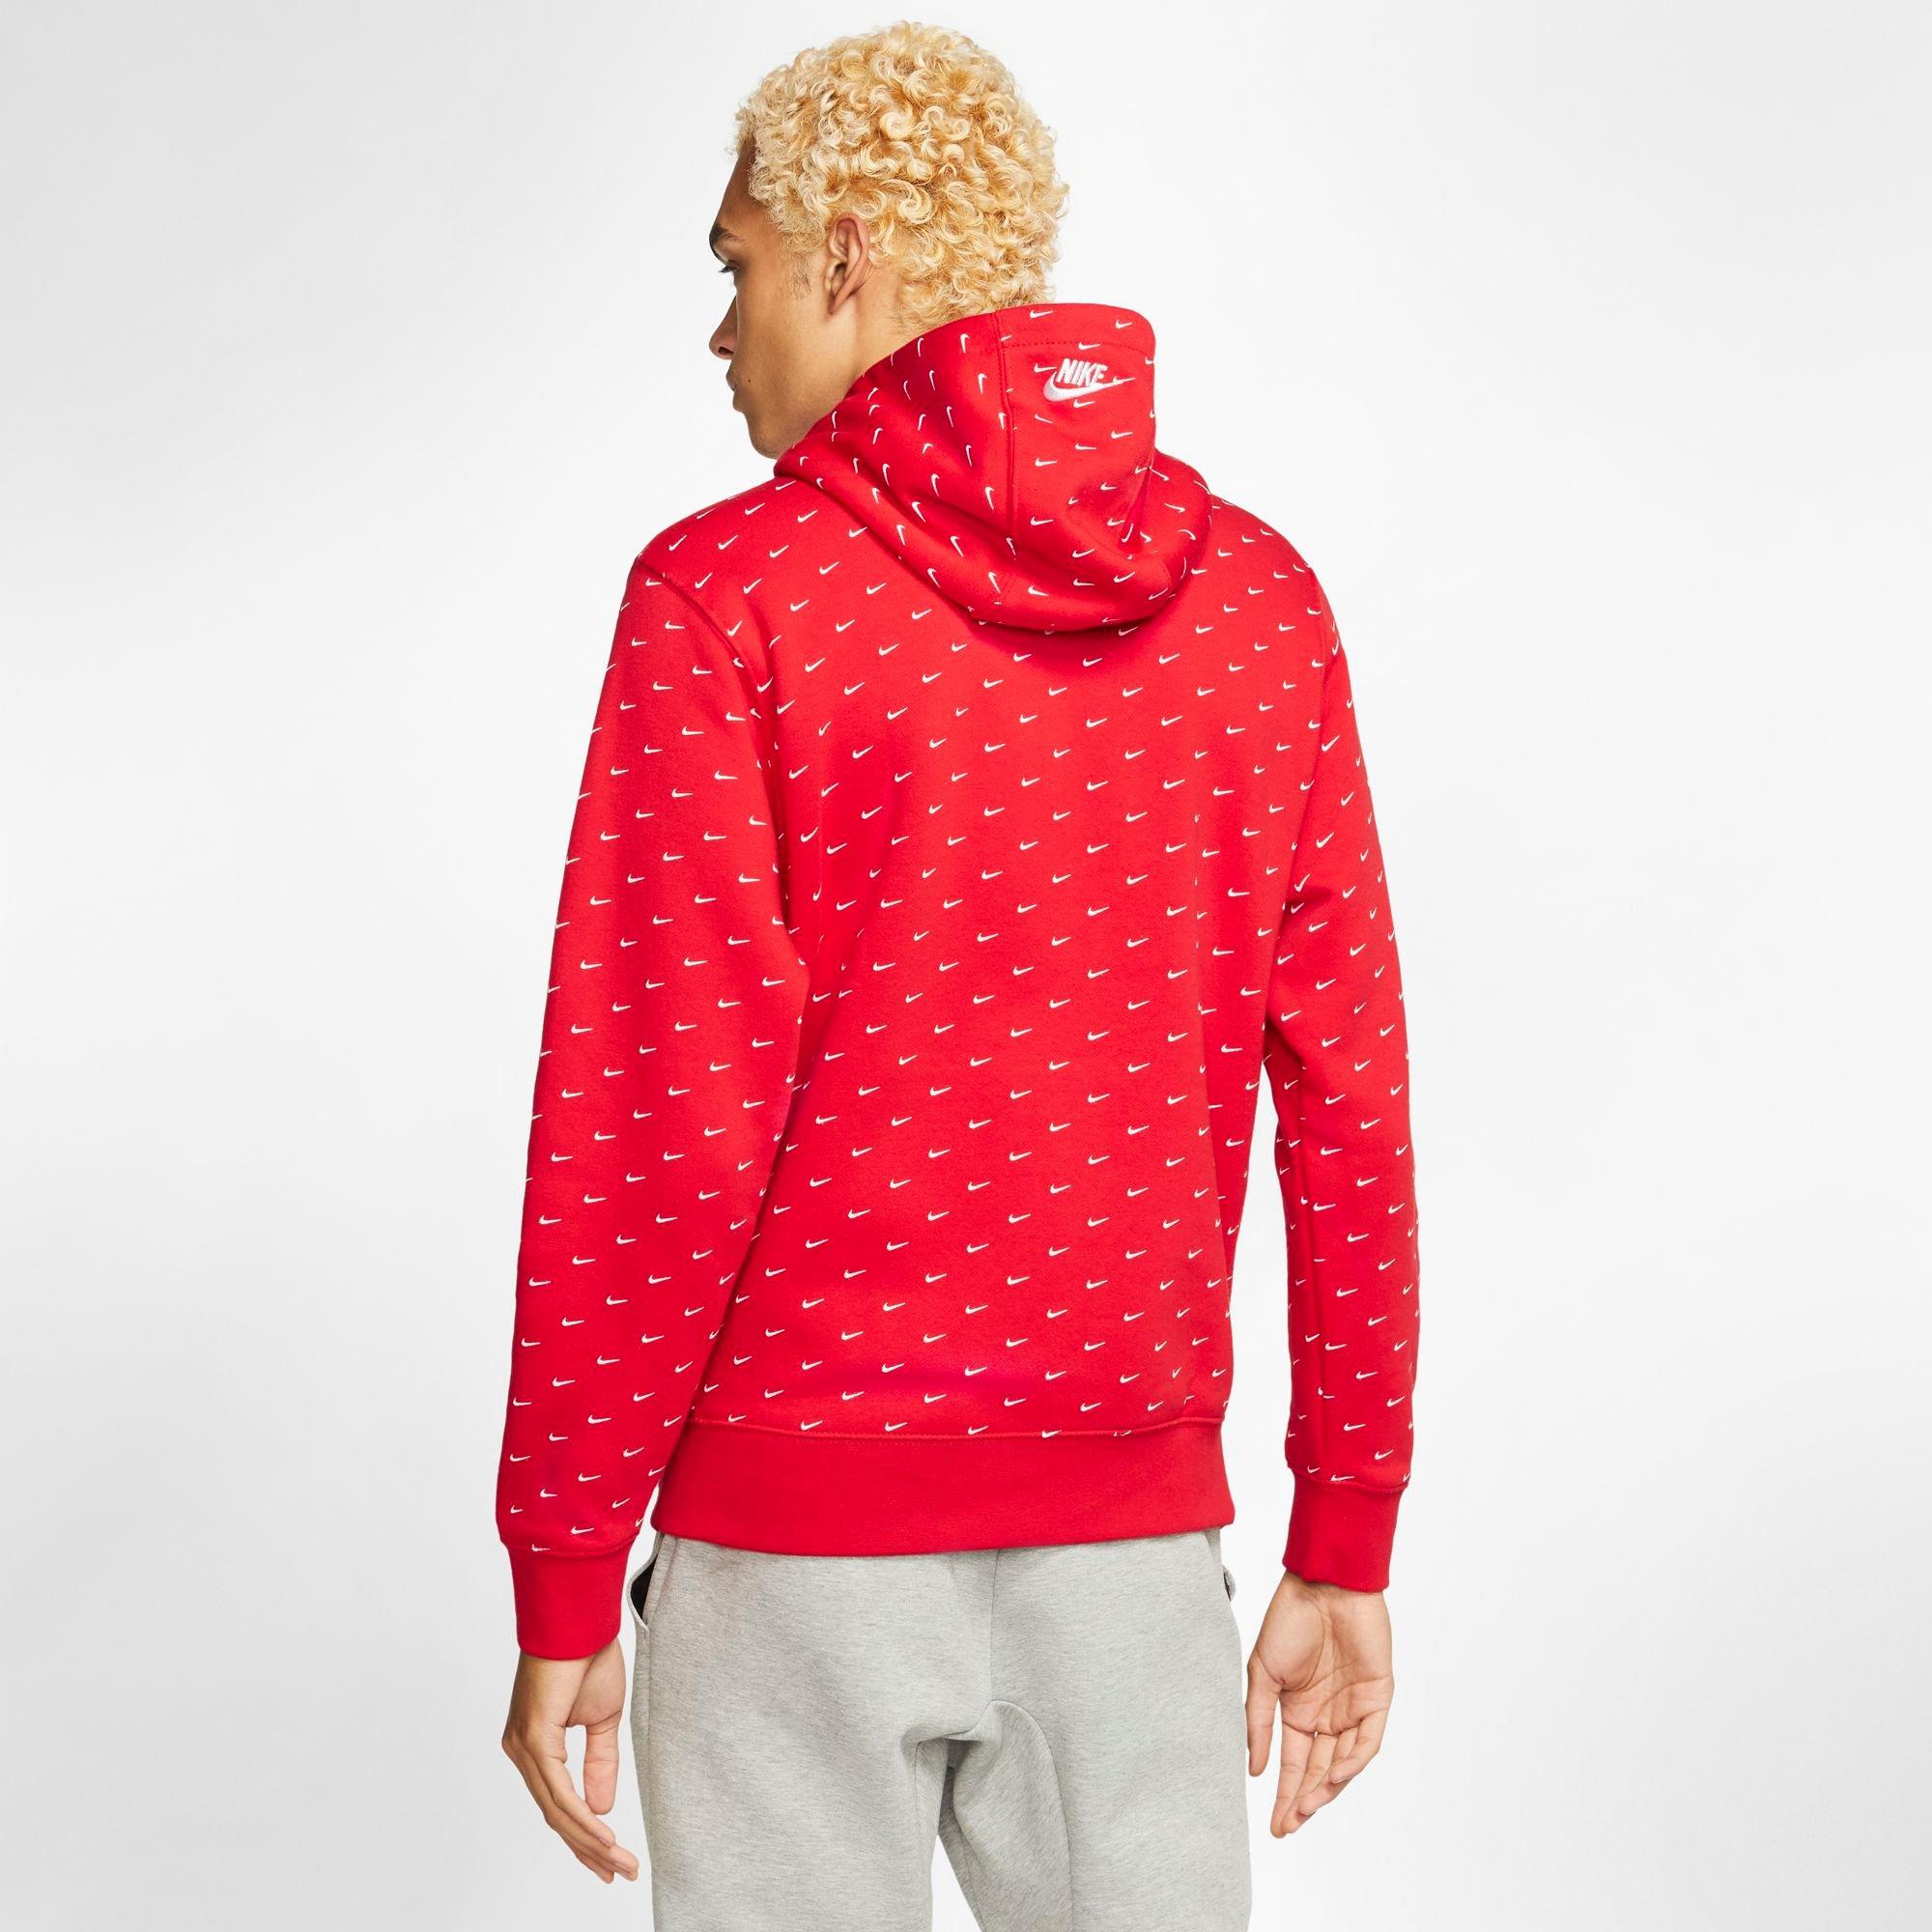 all red nike sweater